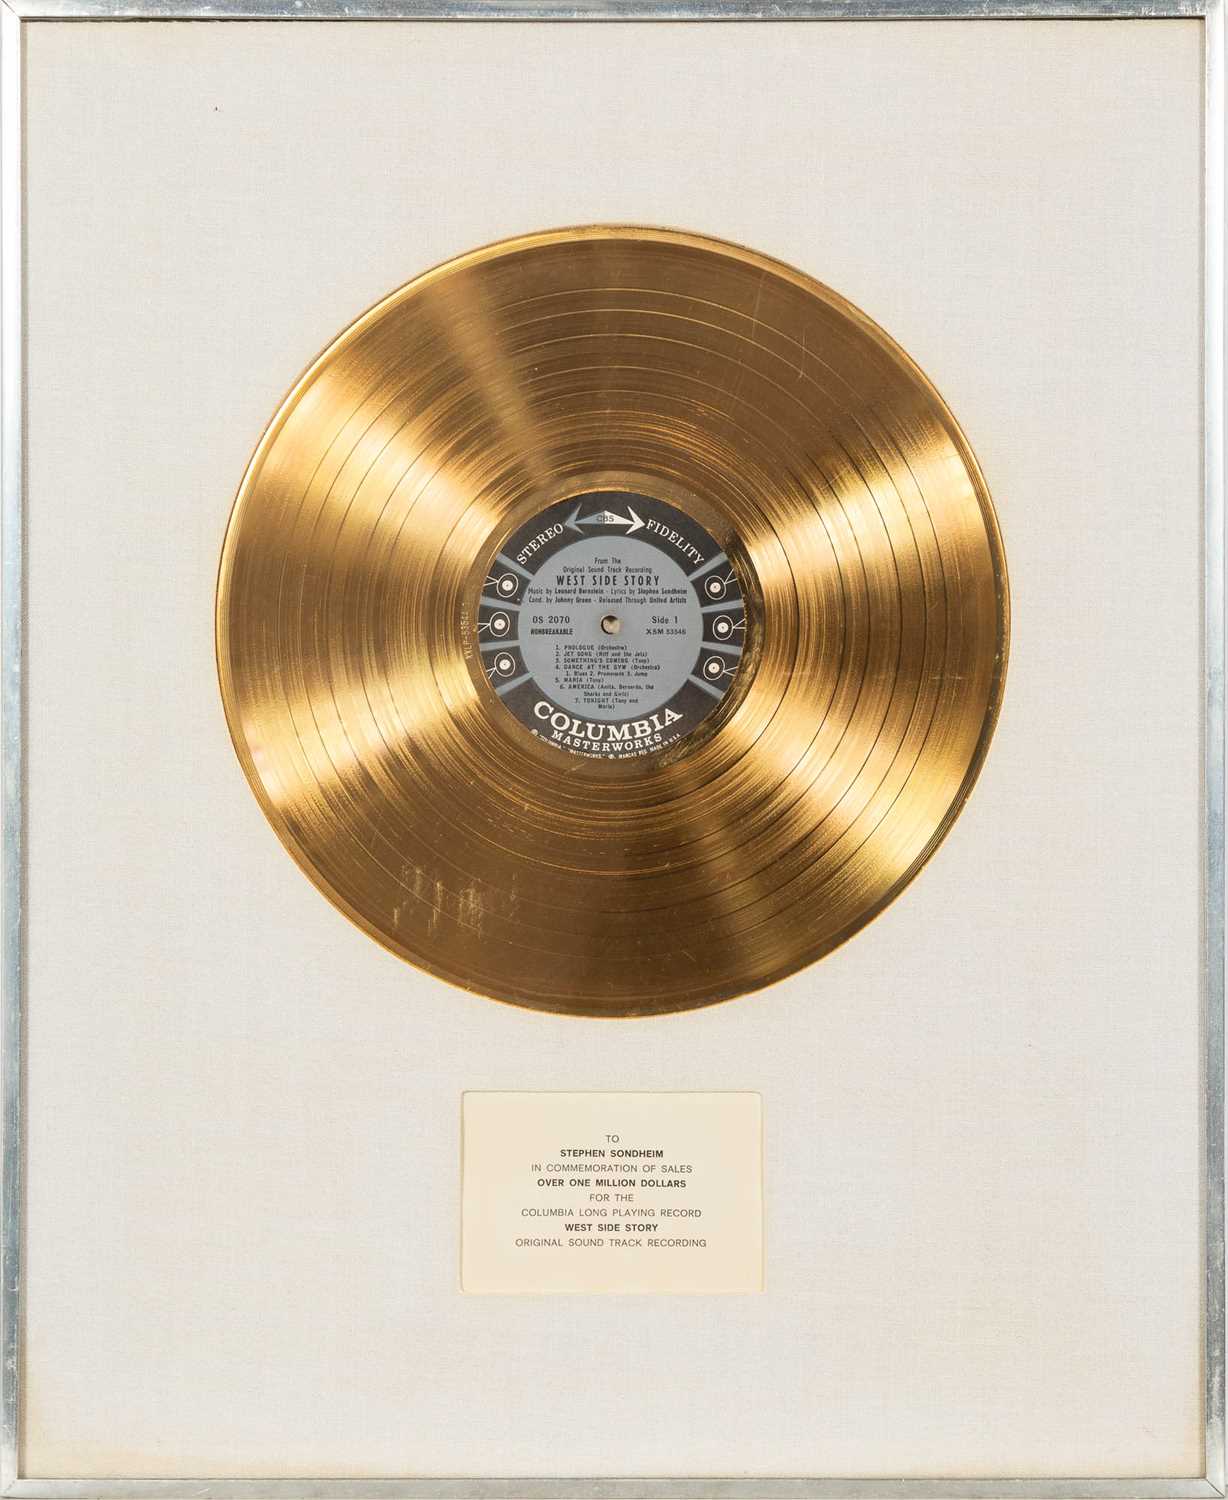 Lot 267 - Stephen Sondheim's Gold Record for the soundtrack to West Side Story